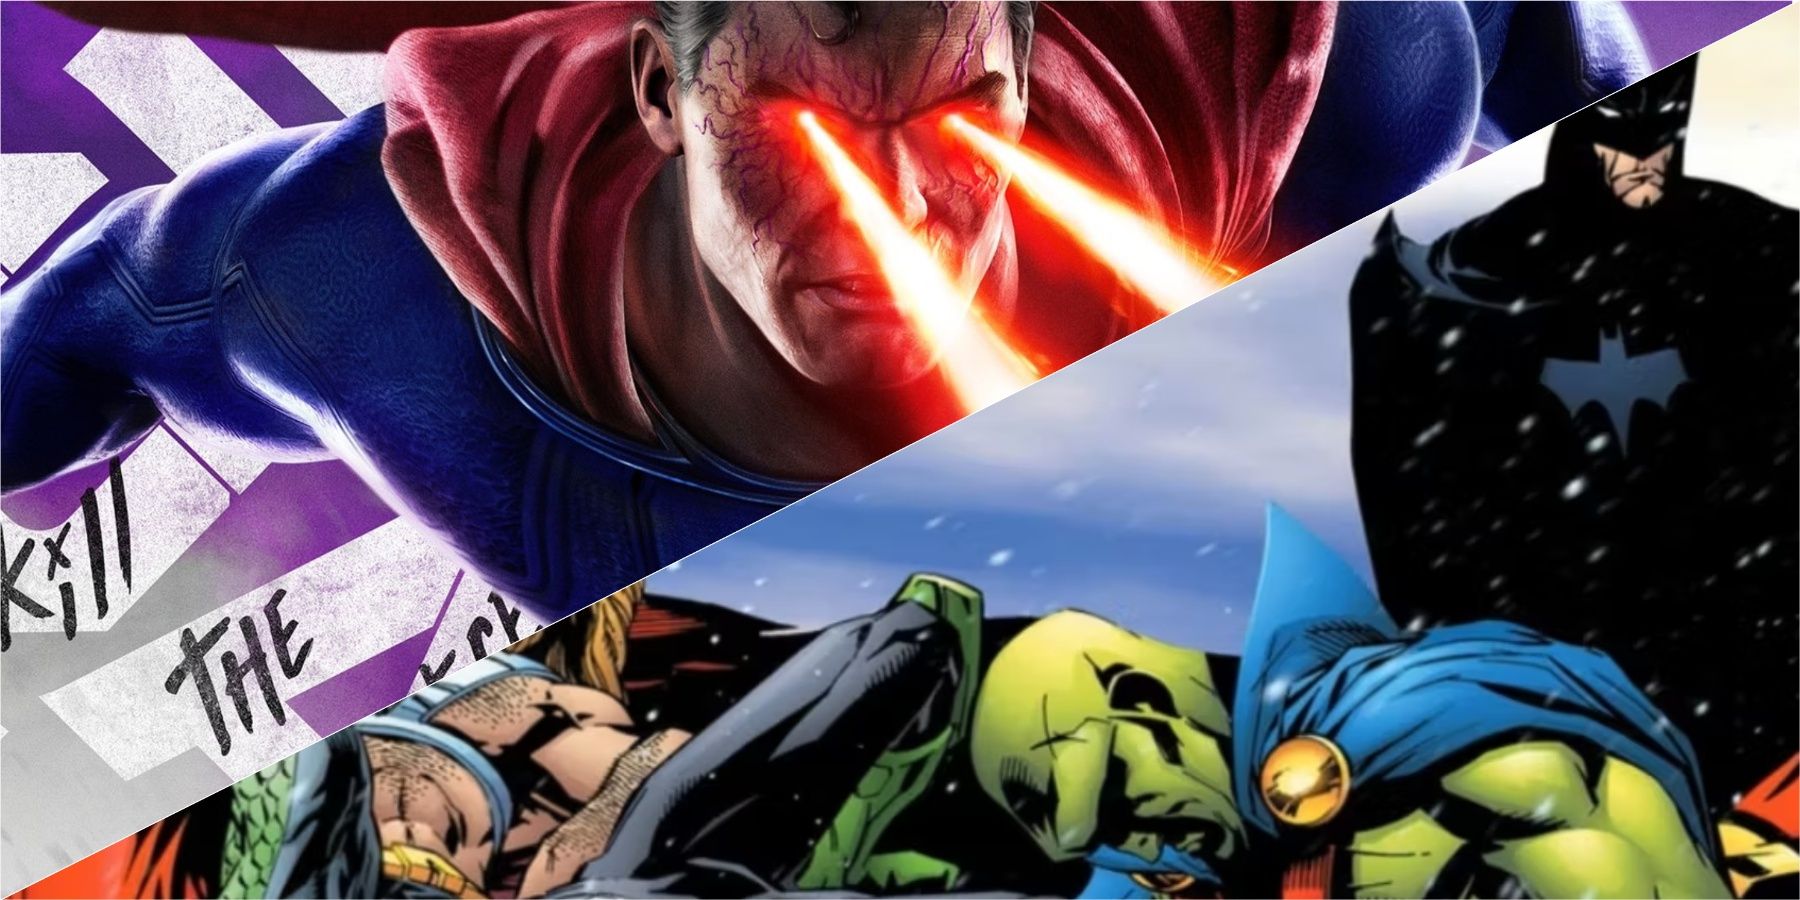 Justice League Infinity: DC Comics Continues the Story of Justice